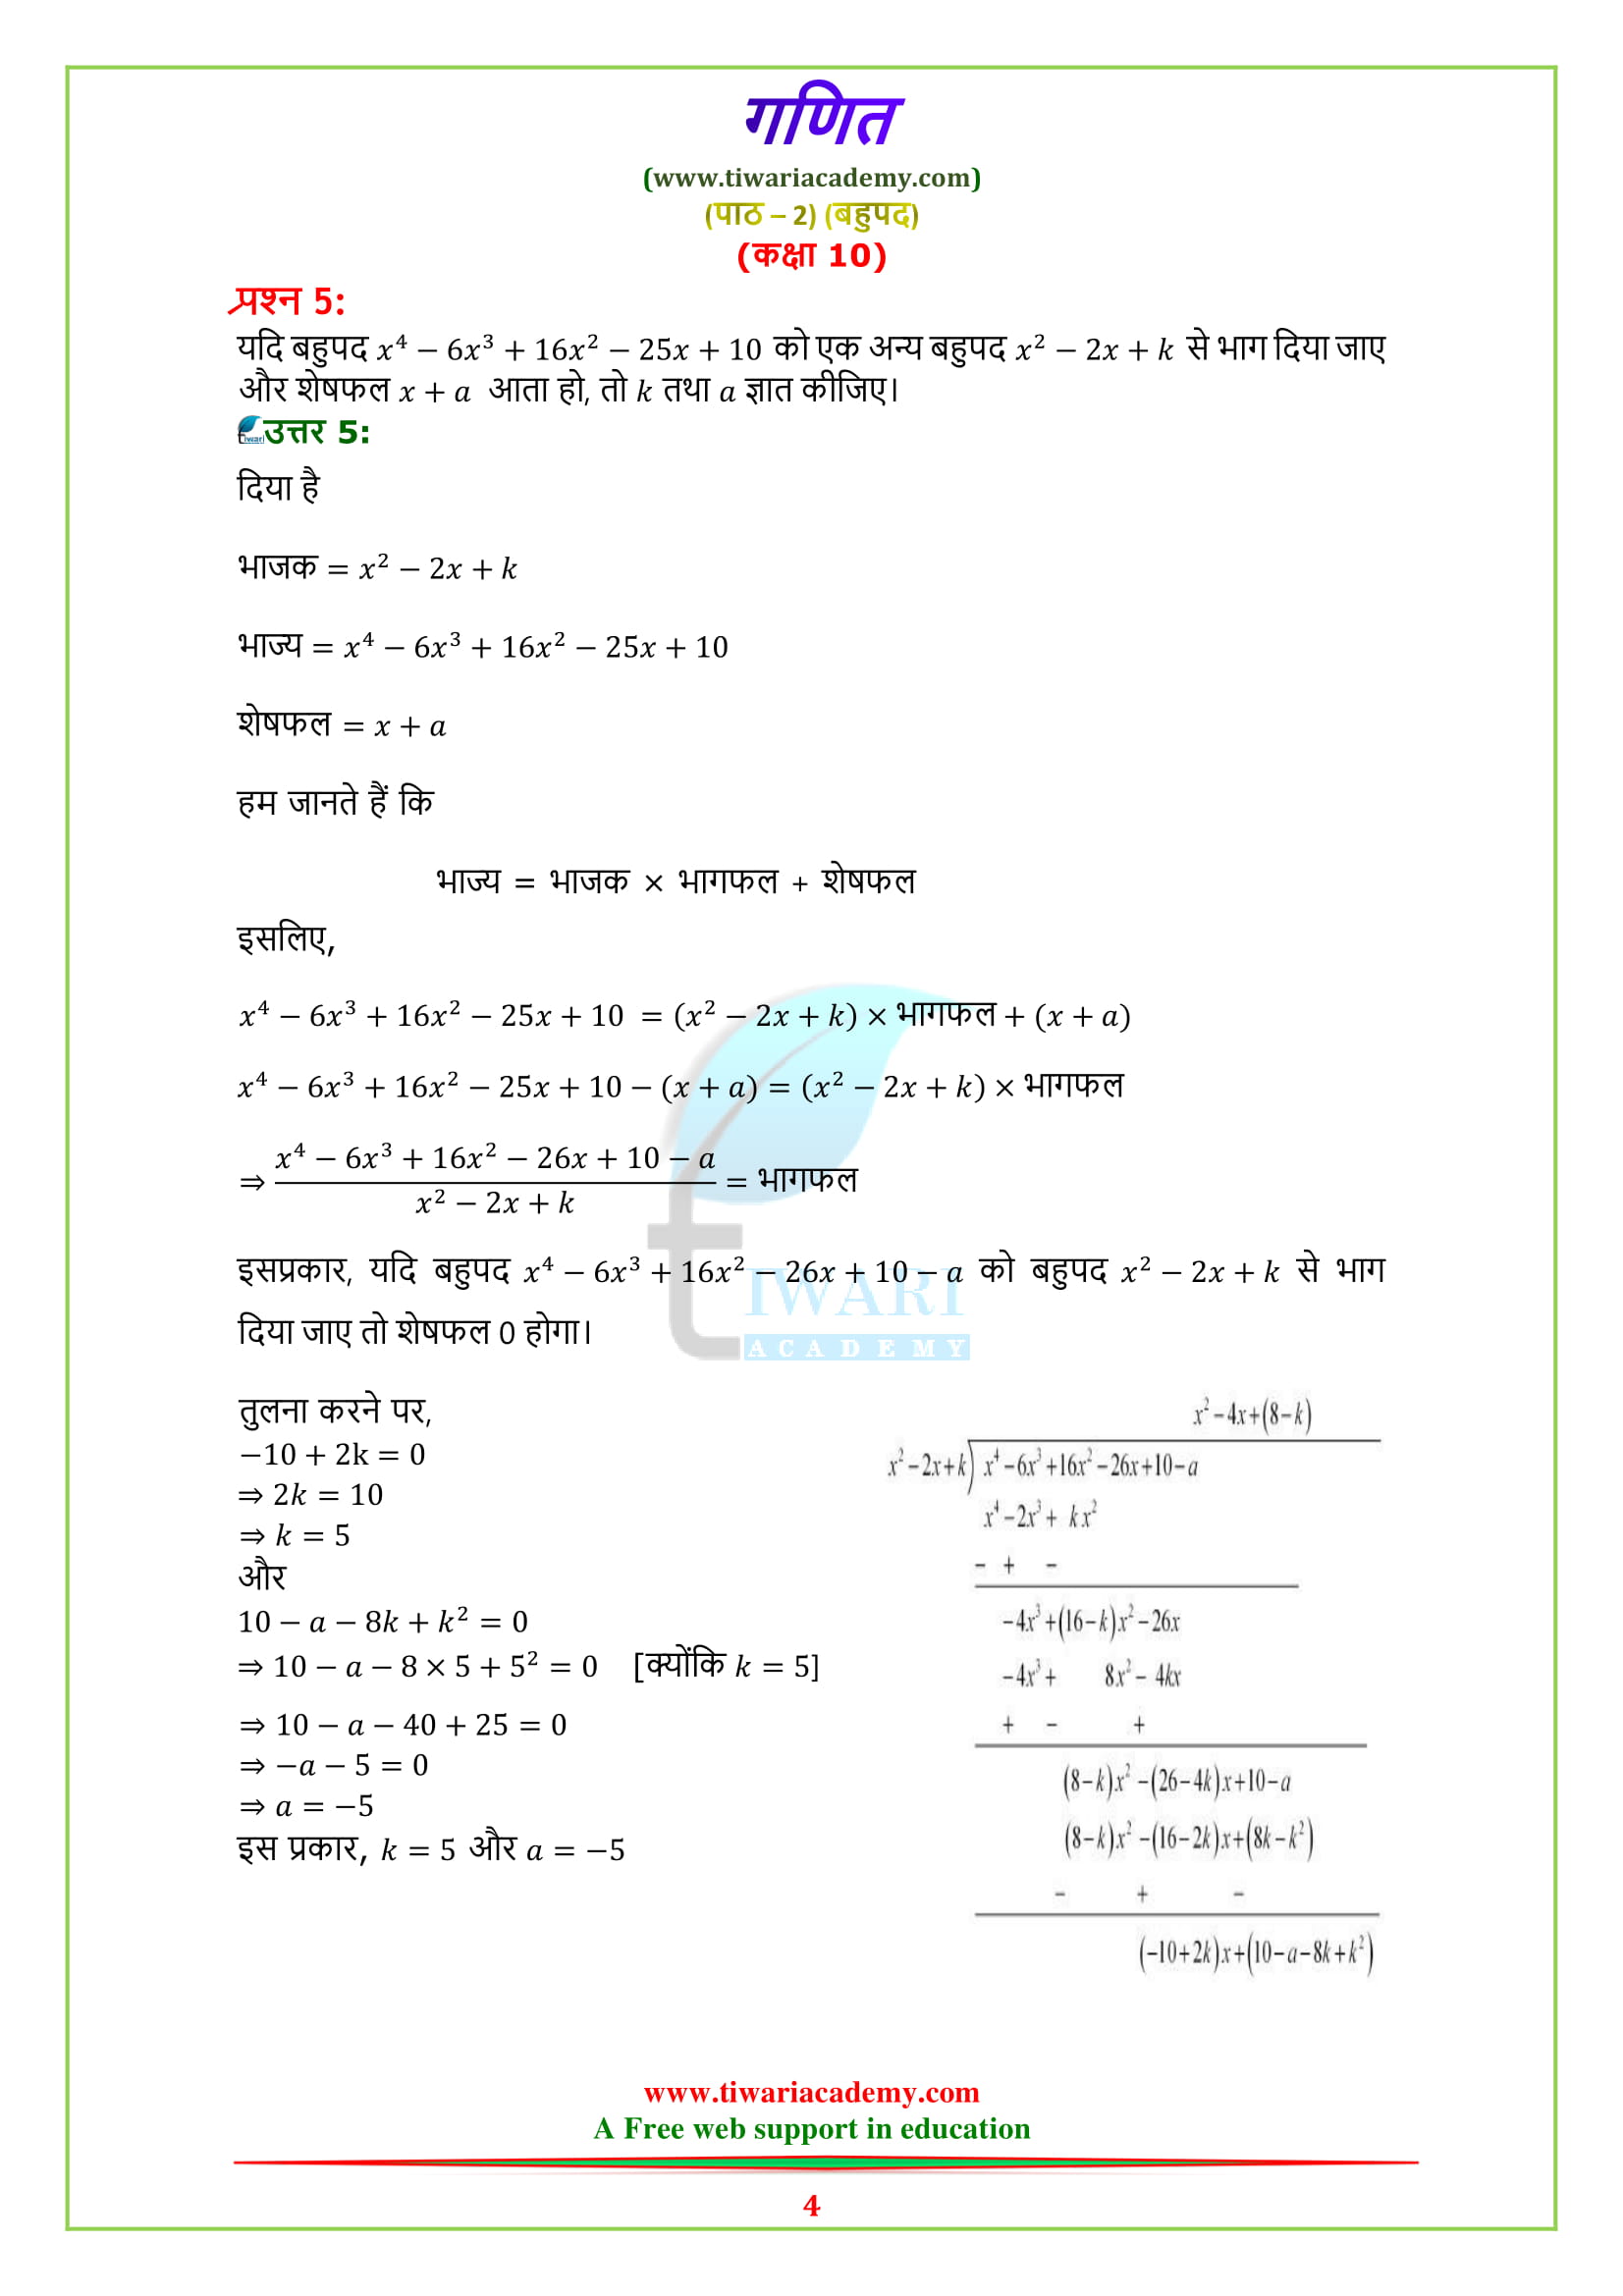 Class 10 Maths chapter 2 exercise 2.4 all question-answers in Hindi